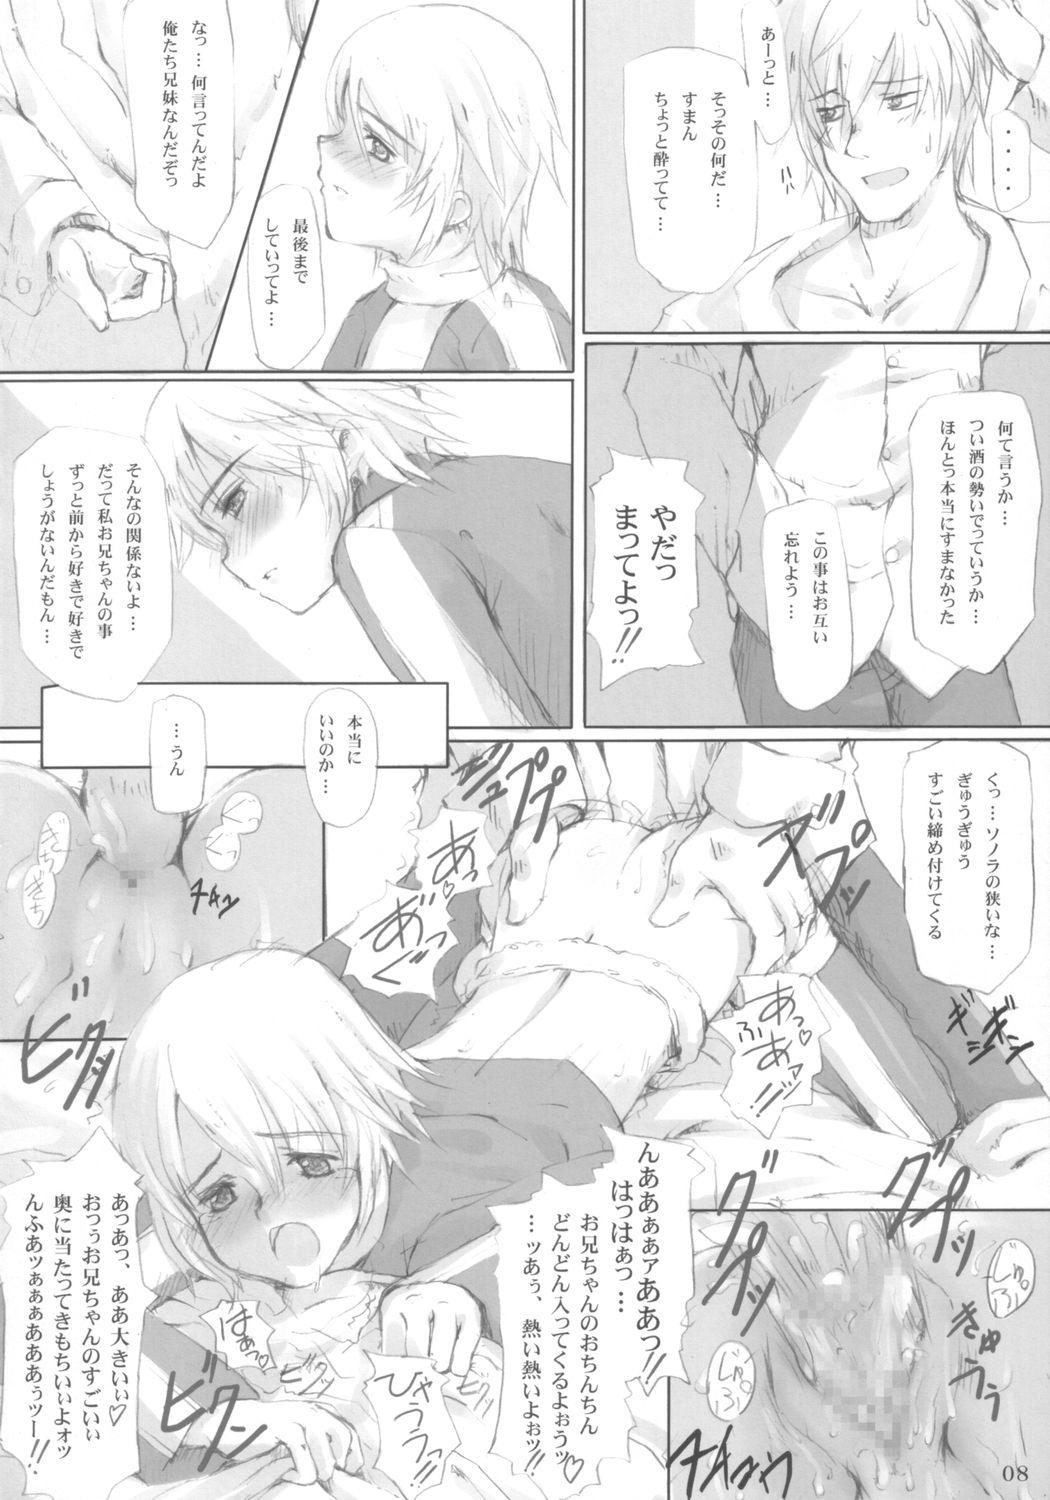 Best Blowjobs Ever low calorie milk candy - Summon night Petite Teen - Page 7